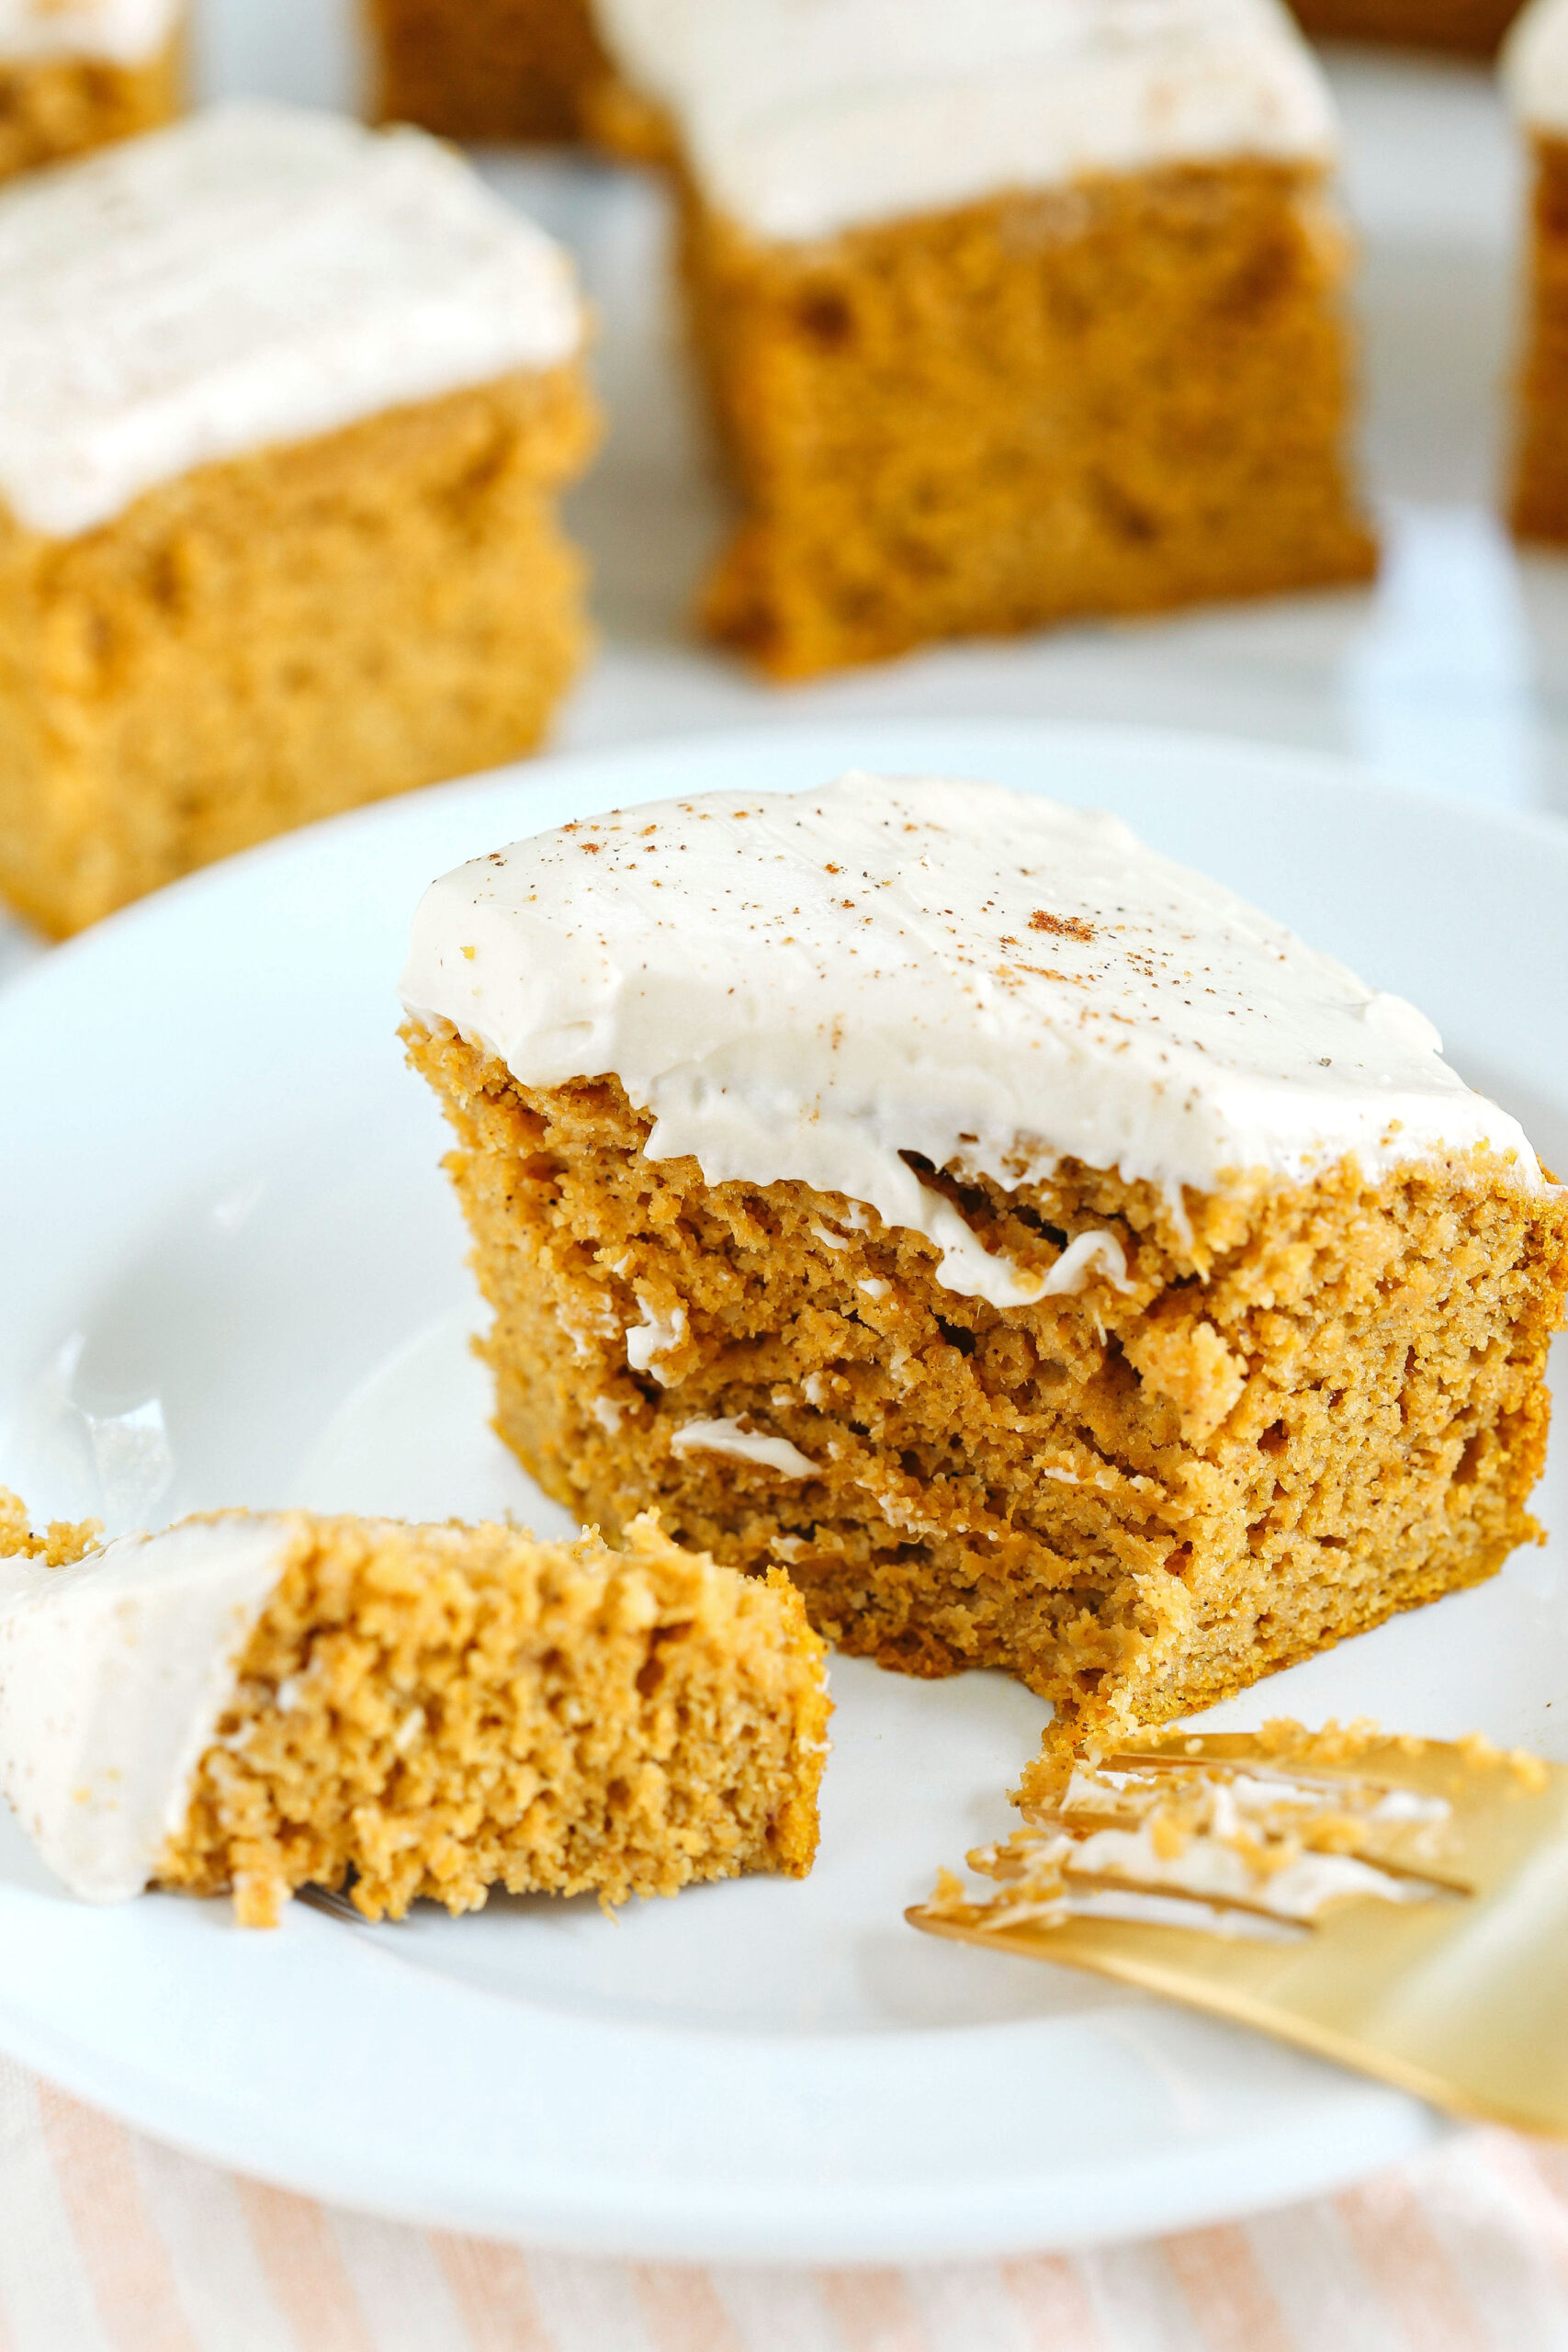 These Healthier Pumpkin Bars are moist, taste just like cake, and are made without any butter, oil or refined sugar!  Topped with a delicious maple cream cheese frosting and loaded with so much pumpkin flavor!